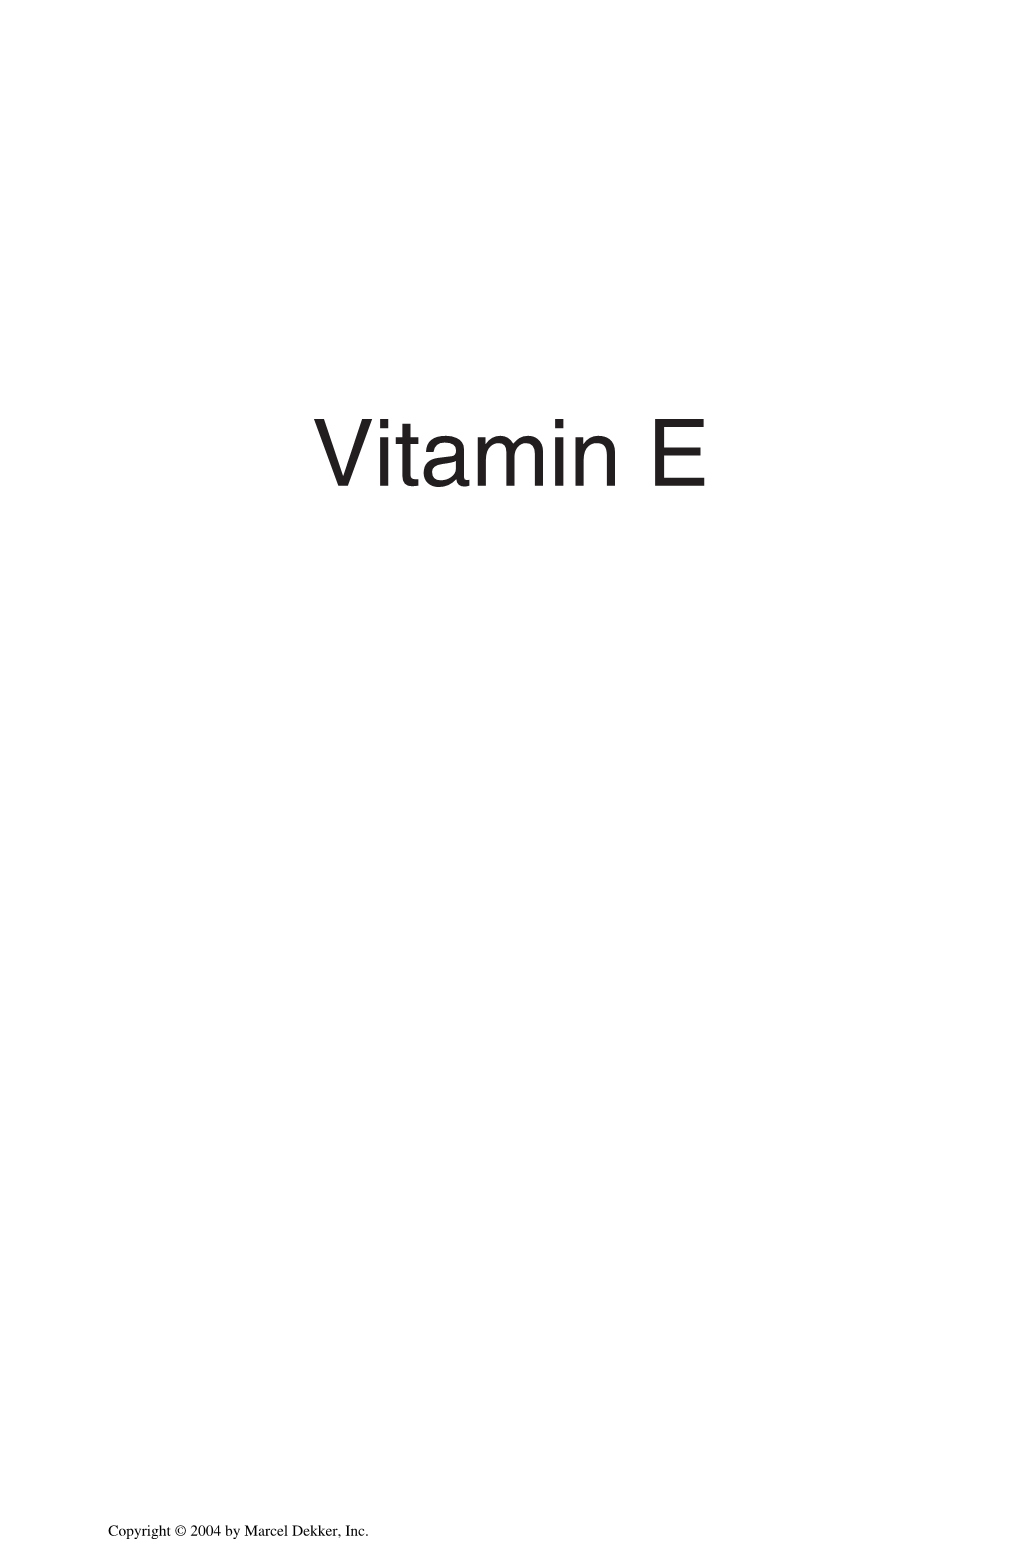 Vitamin E: Food Chemistry, Composition, and Analysis, Ronald Eitenmiller and Junsoo Lee